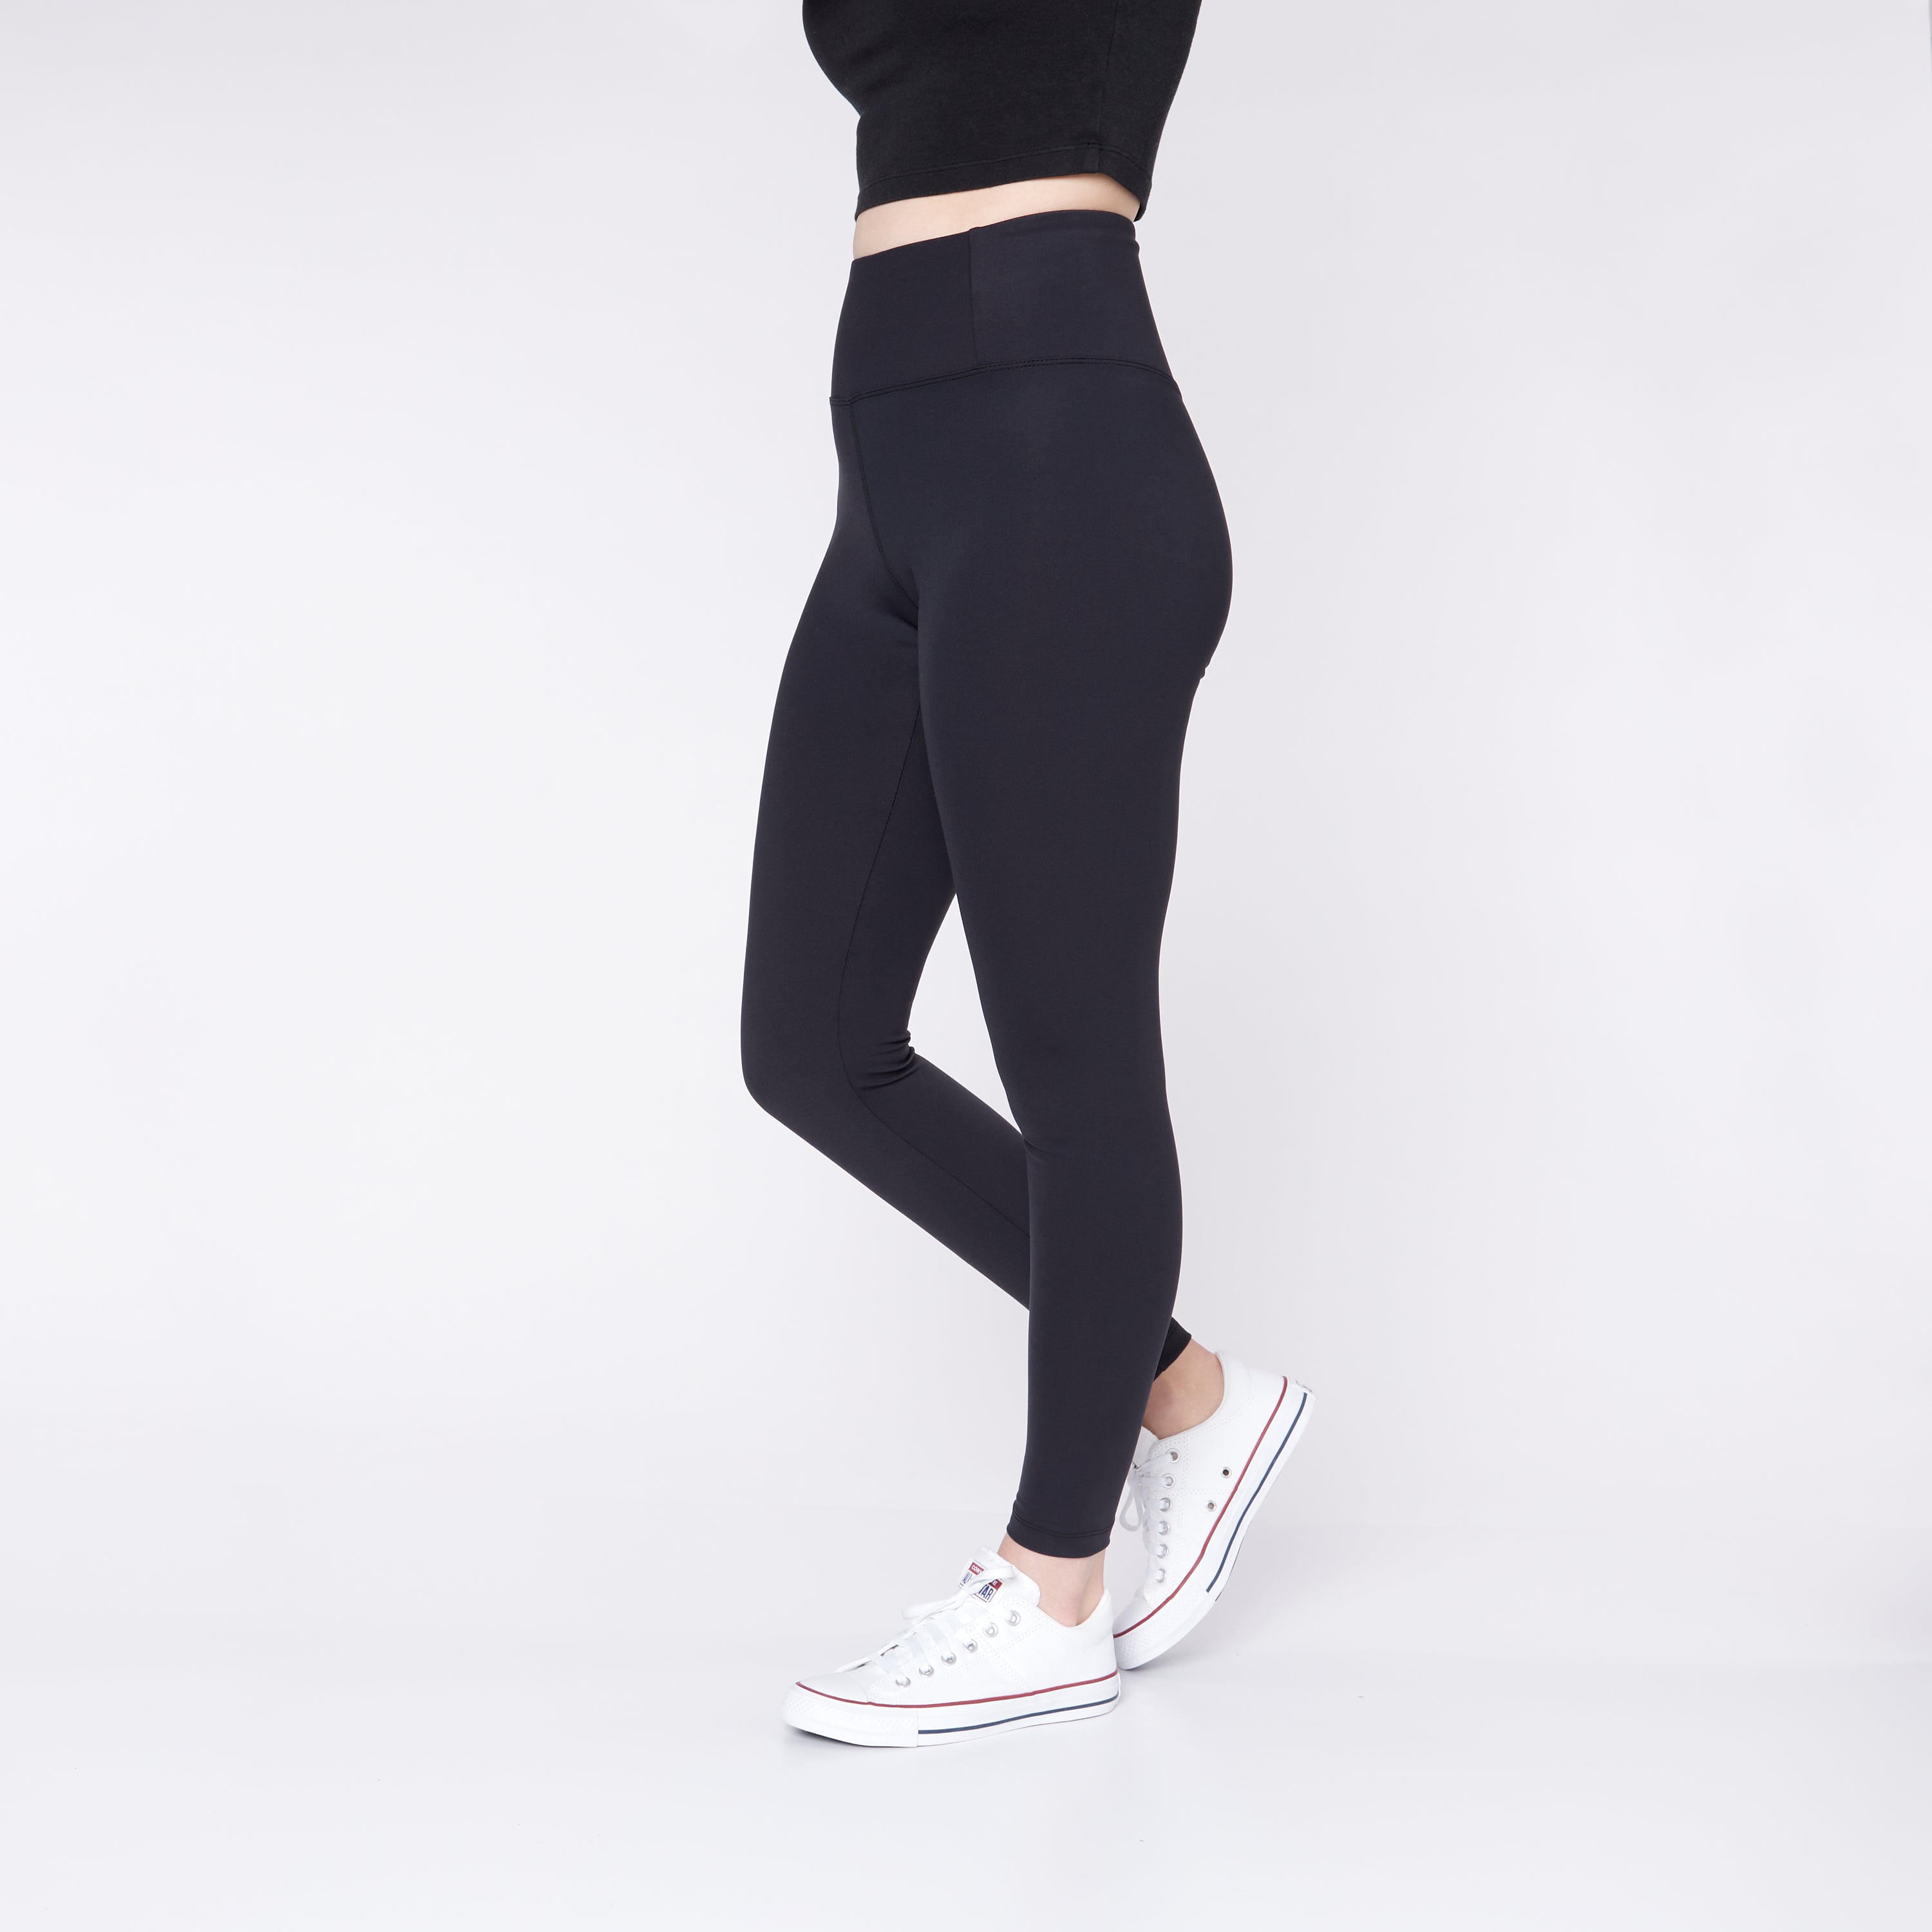 Active Life Woman Leggings Black Small at  Women's Clothing store